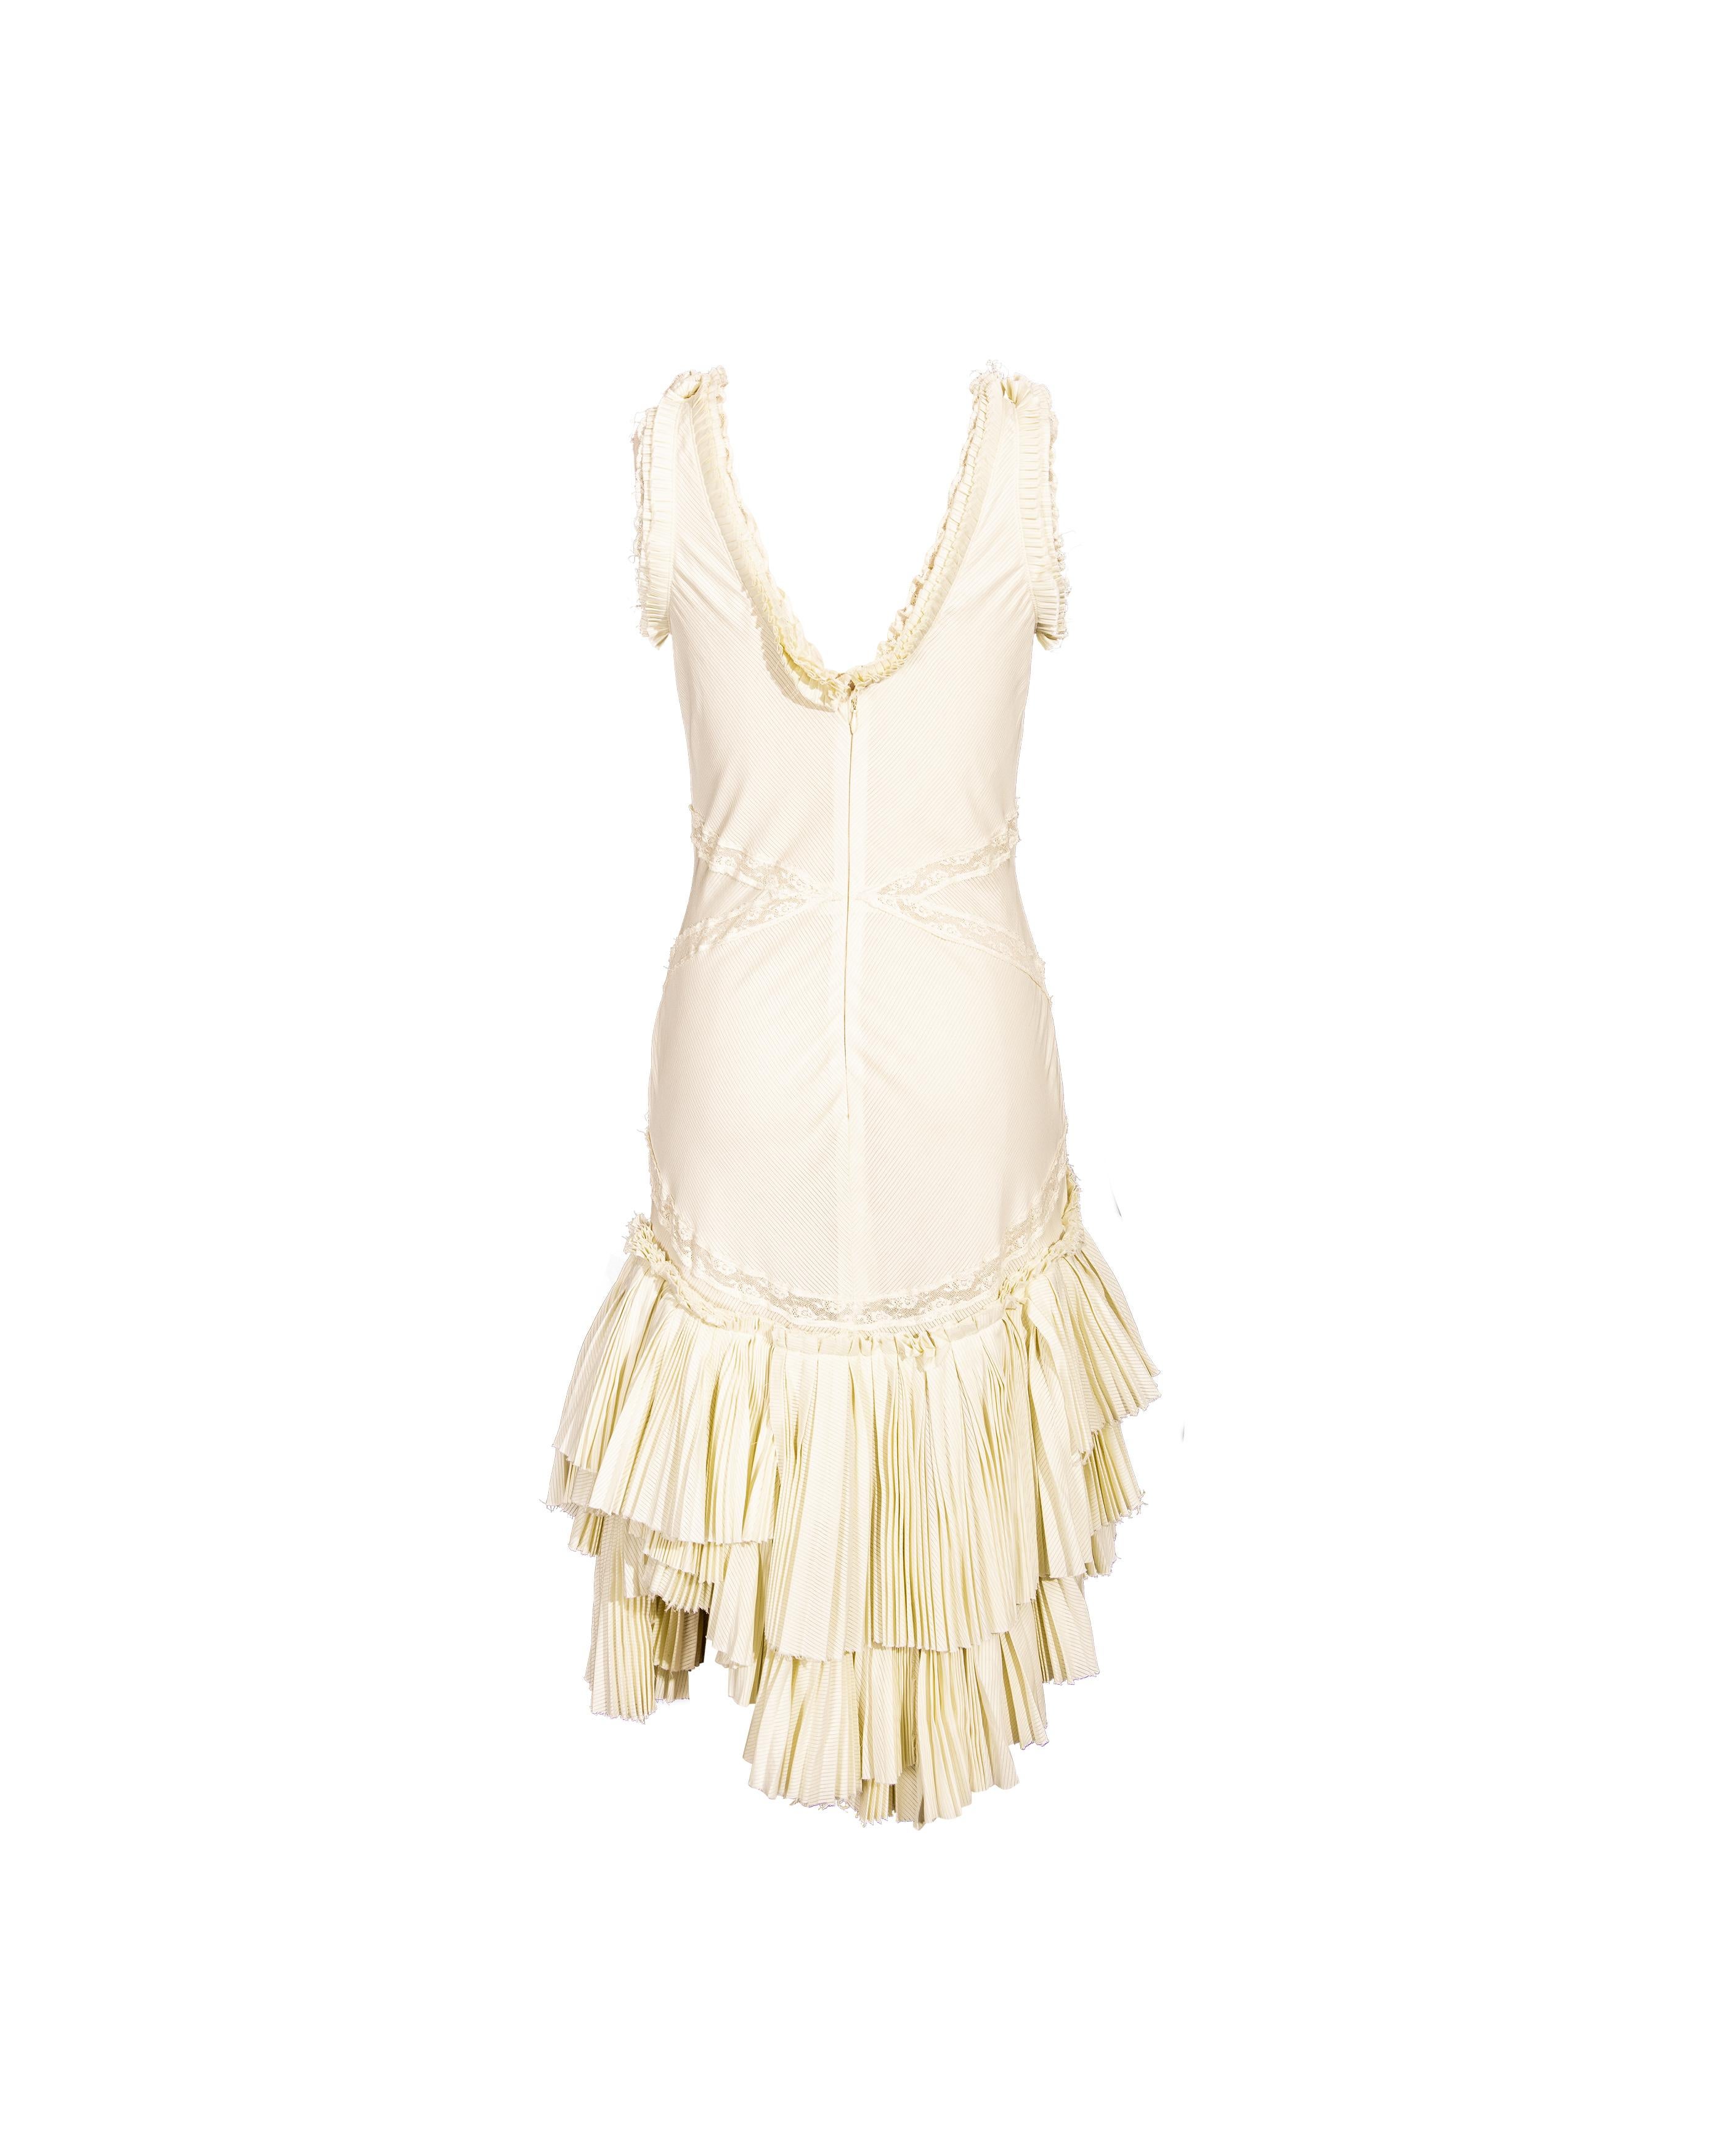 S/S 2005 Alexander McQueen (Lifetime) Pale Yellow Pleated and Lace Cotton Dress 1